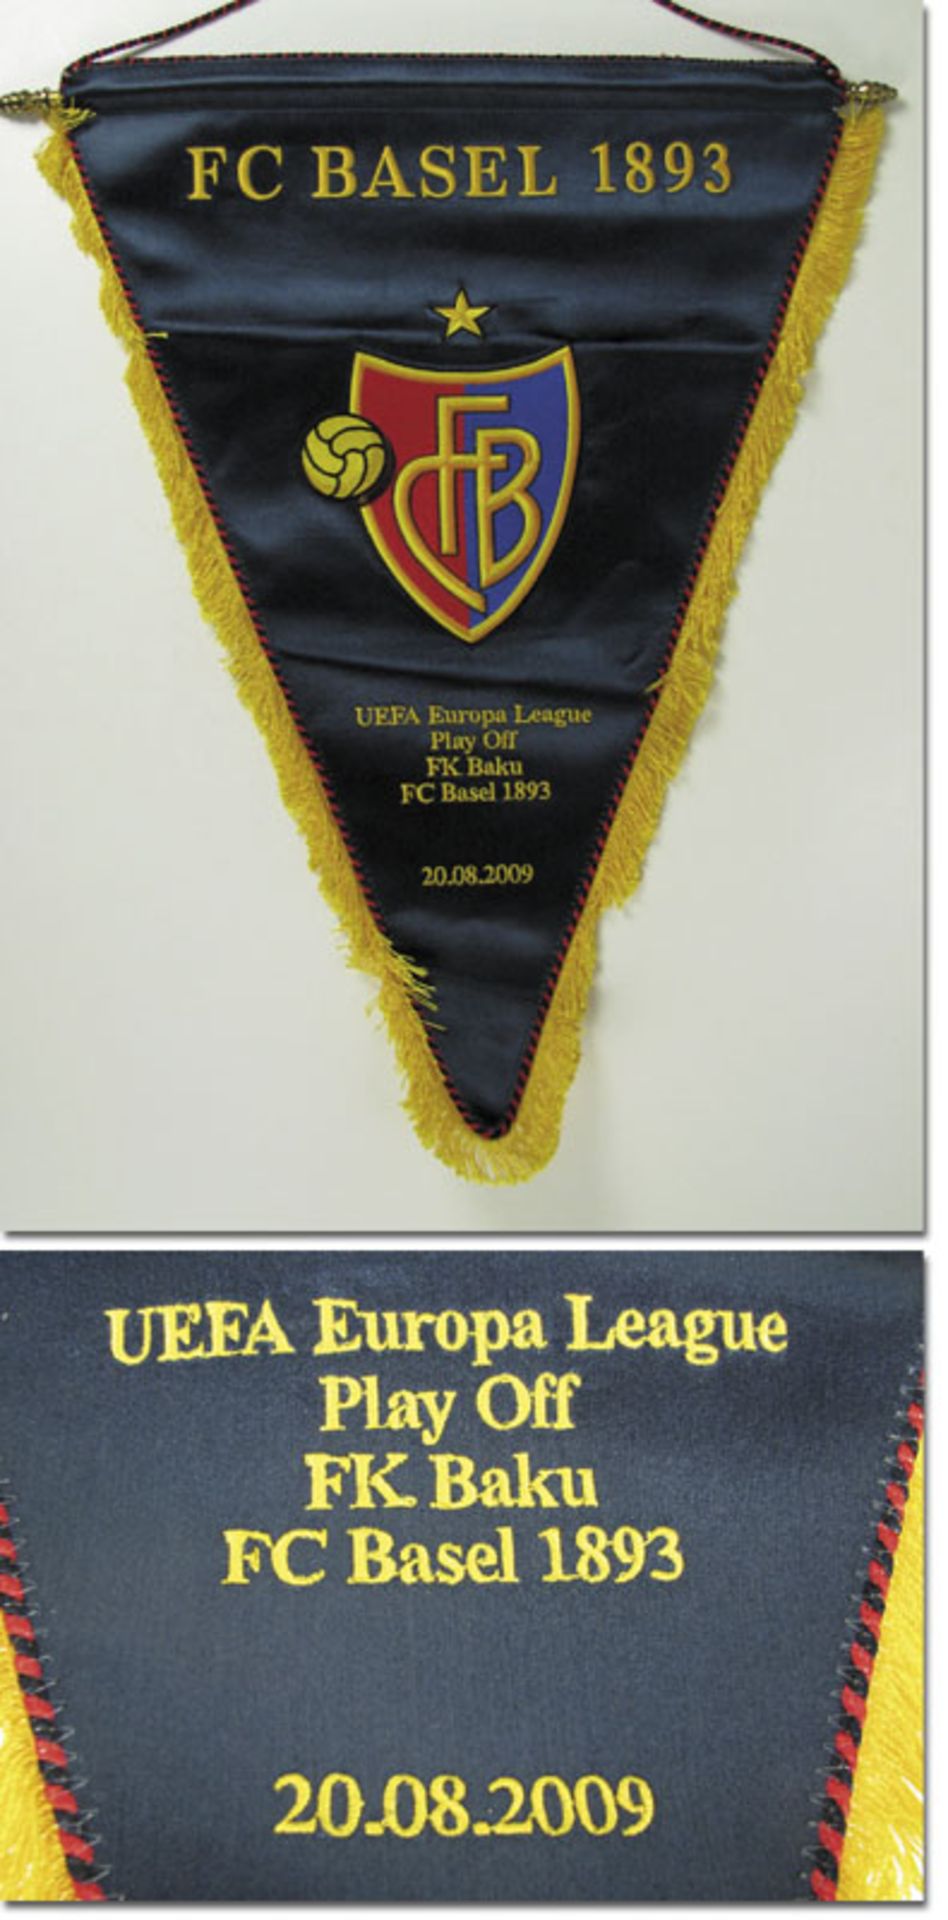 FC Basel Football Match pennant 2009 - Official match pennant FC Basel 1893 with mounted embroidered